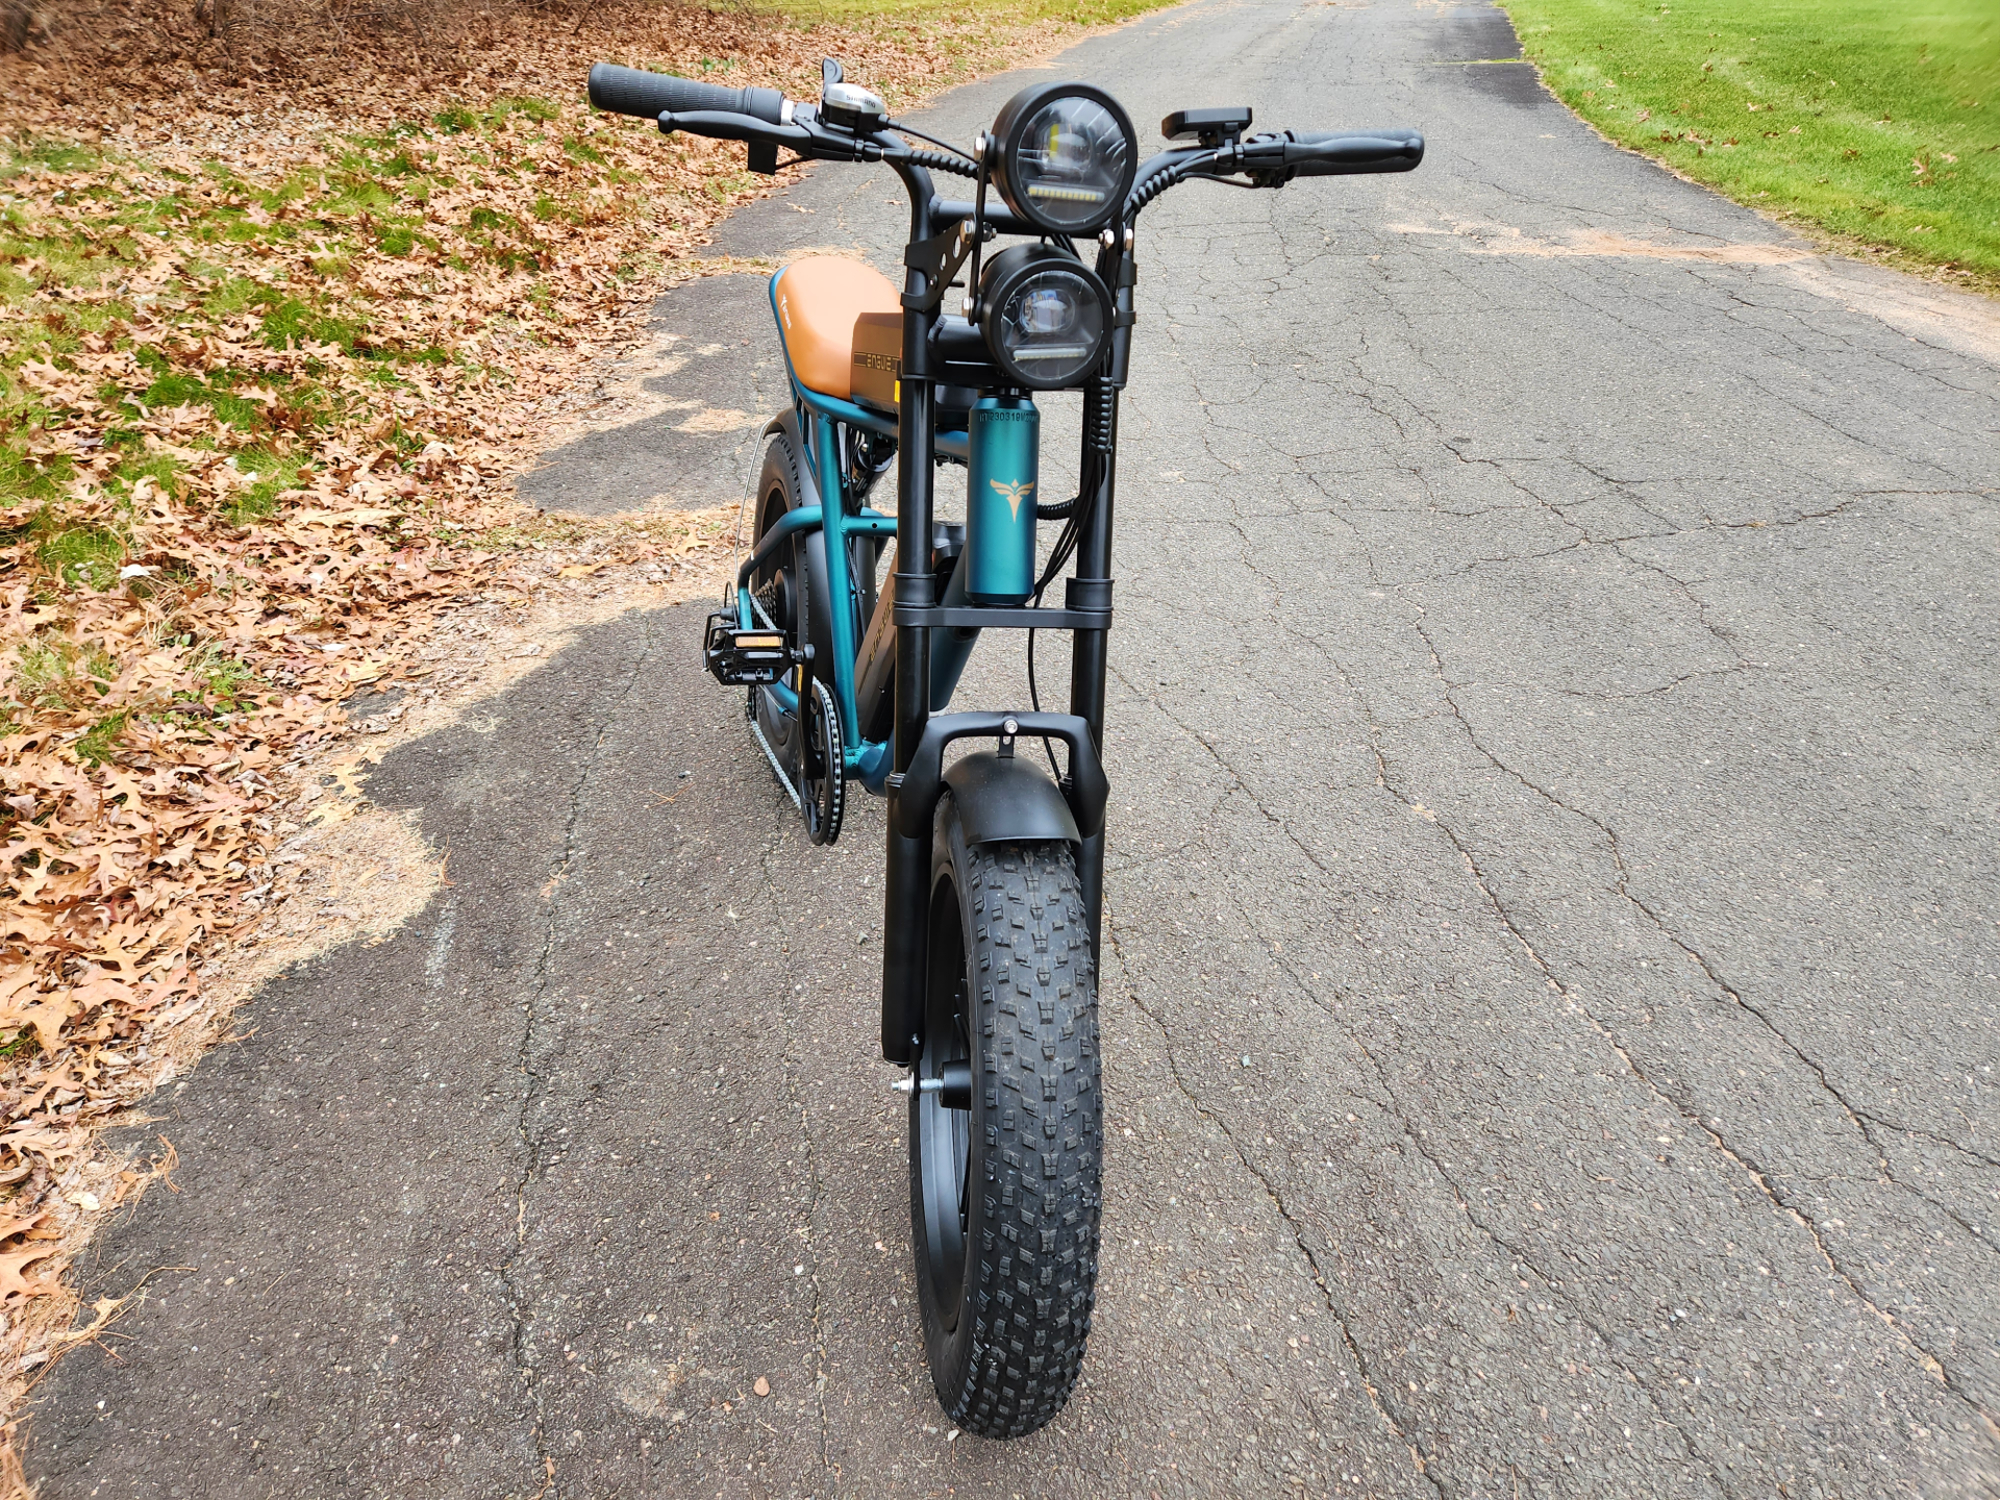 Engwe M20 e-bike has dual vertical headlamps and knobby fat tires.